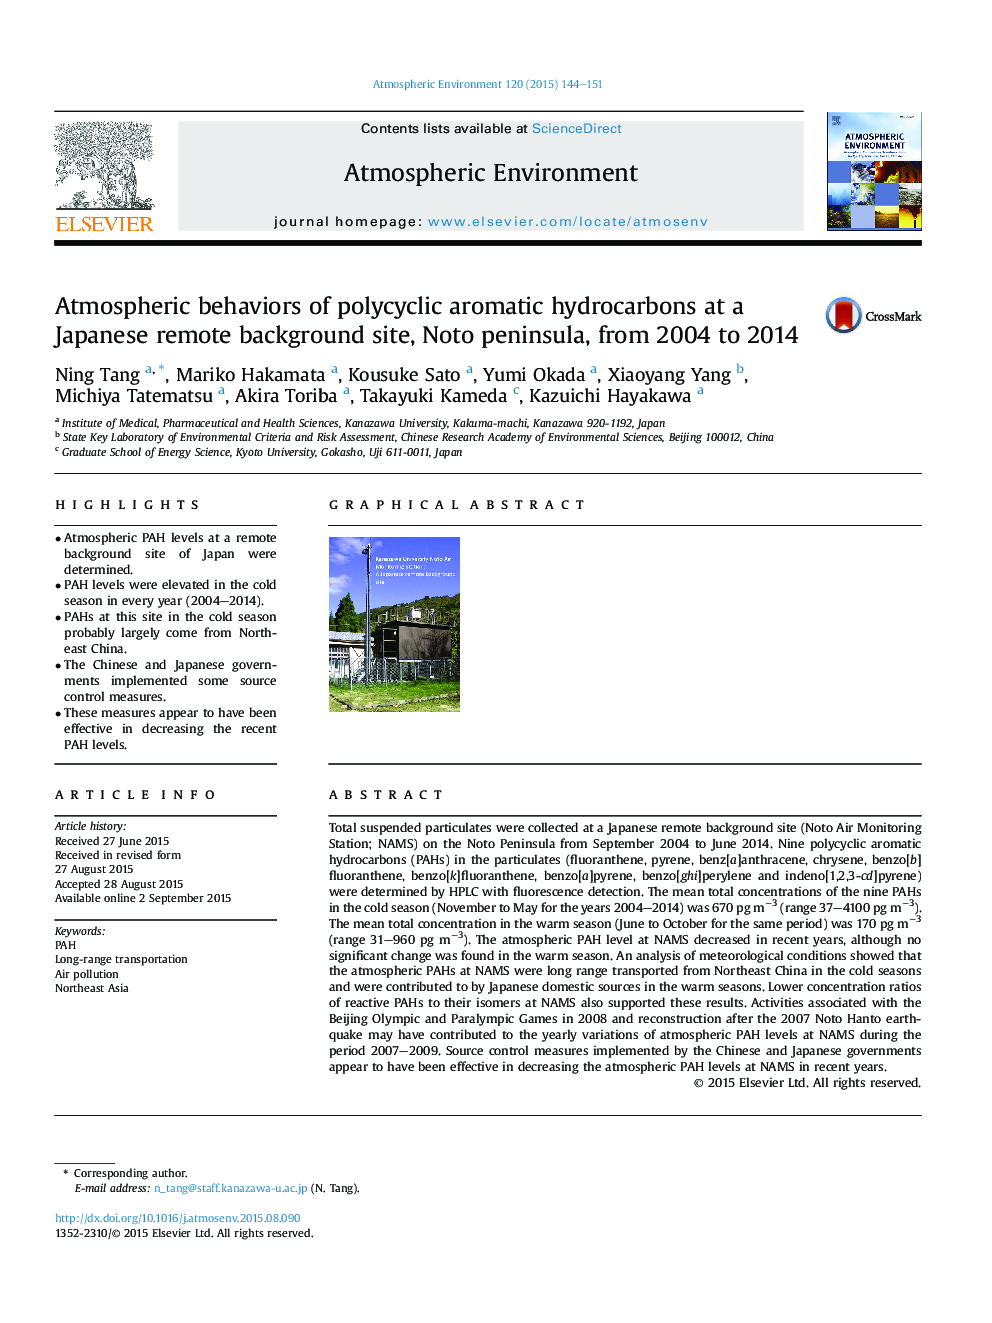 Atmospheric behaviors of polycyclic aromatic hydrocarbons at a Japanese remote background site, Noto peninsula, from 2004 to 2014